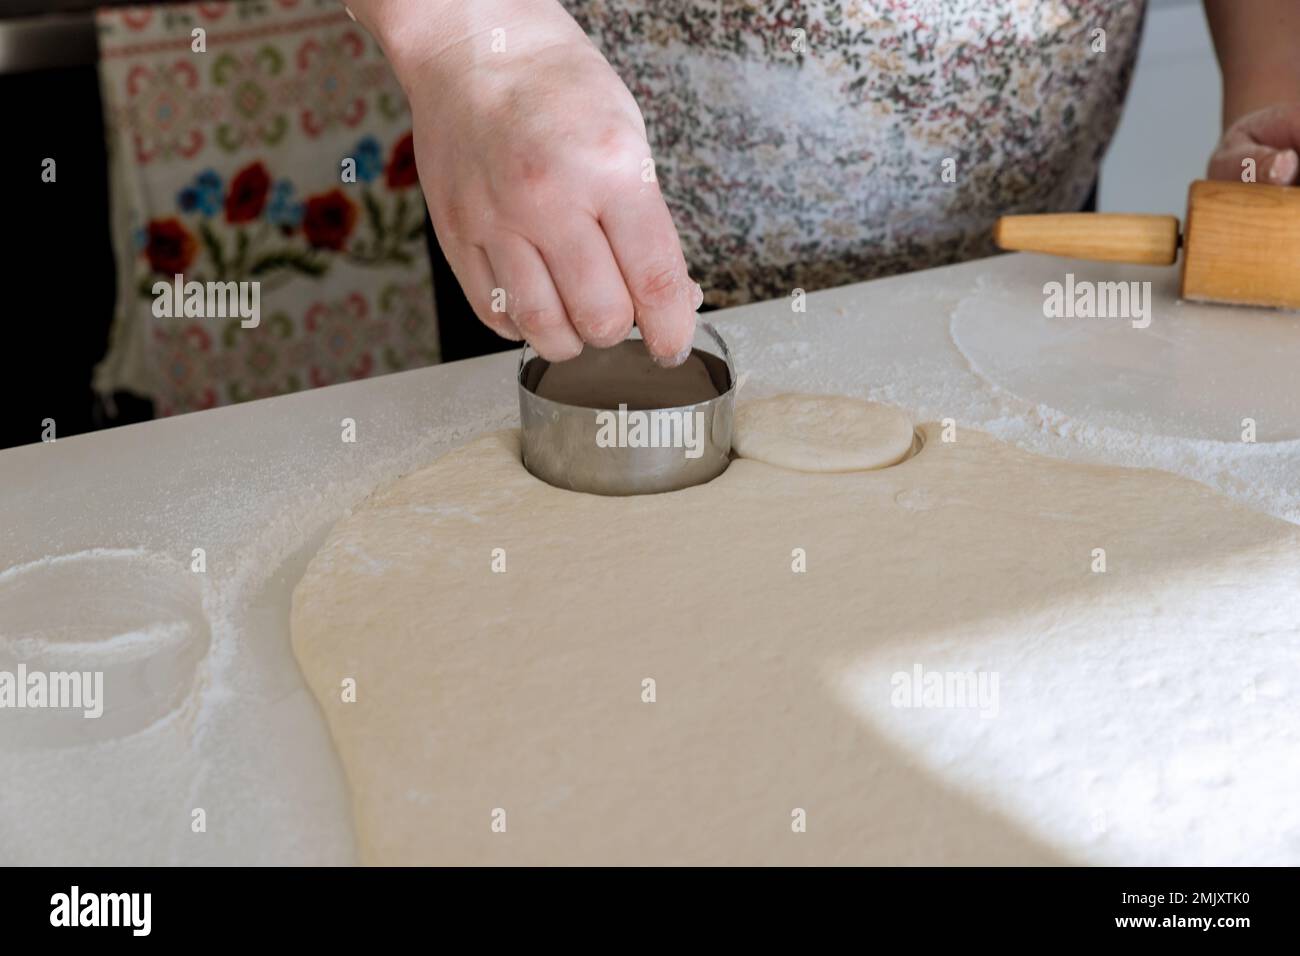 Raw homemade dough for donuts cutting dough into round pieces with rolling pin on bakery working table Stock Photo